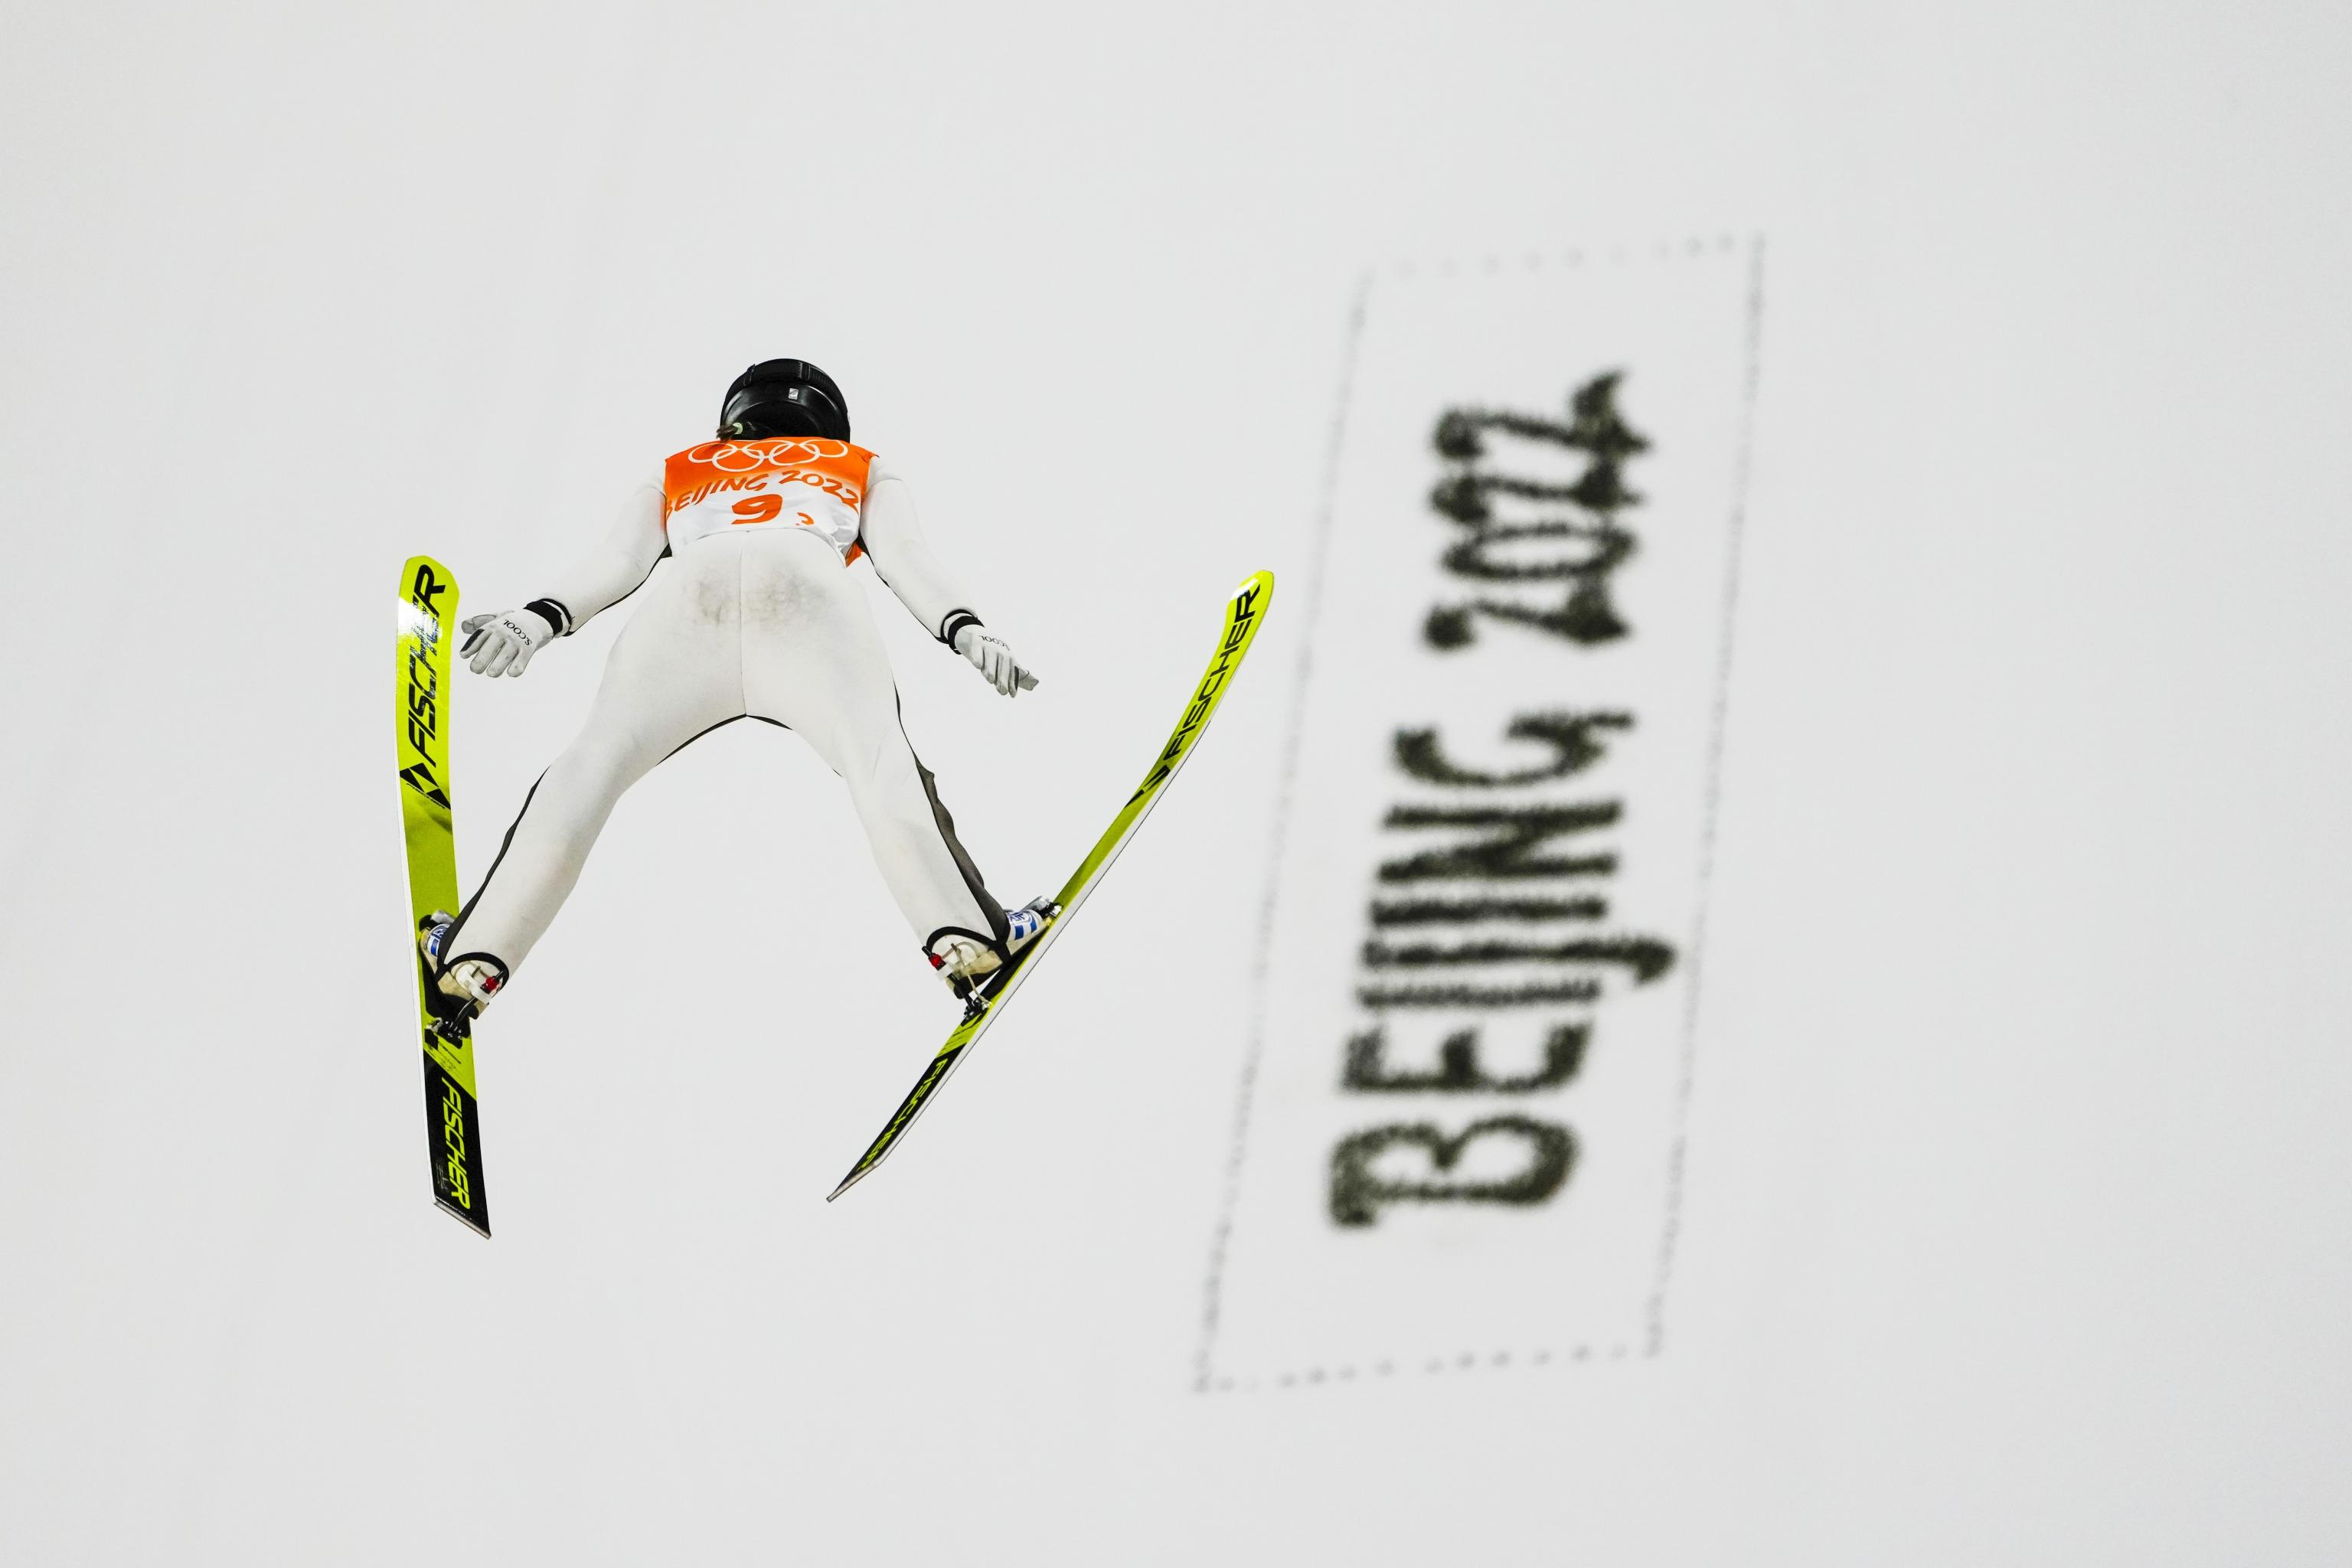 Olympic Ski Jumping 2022: Medal Winners for All Events at Beijing